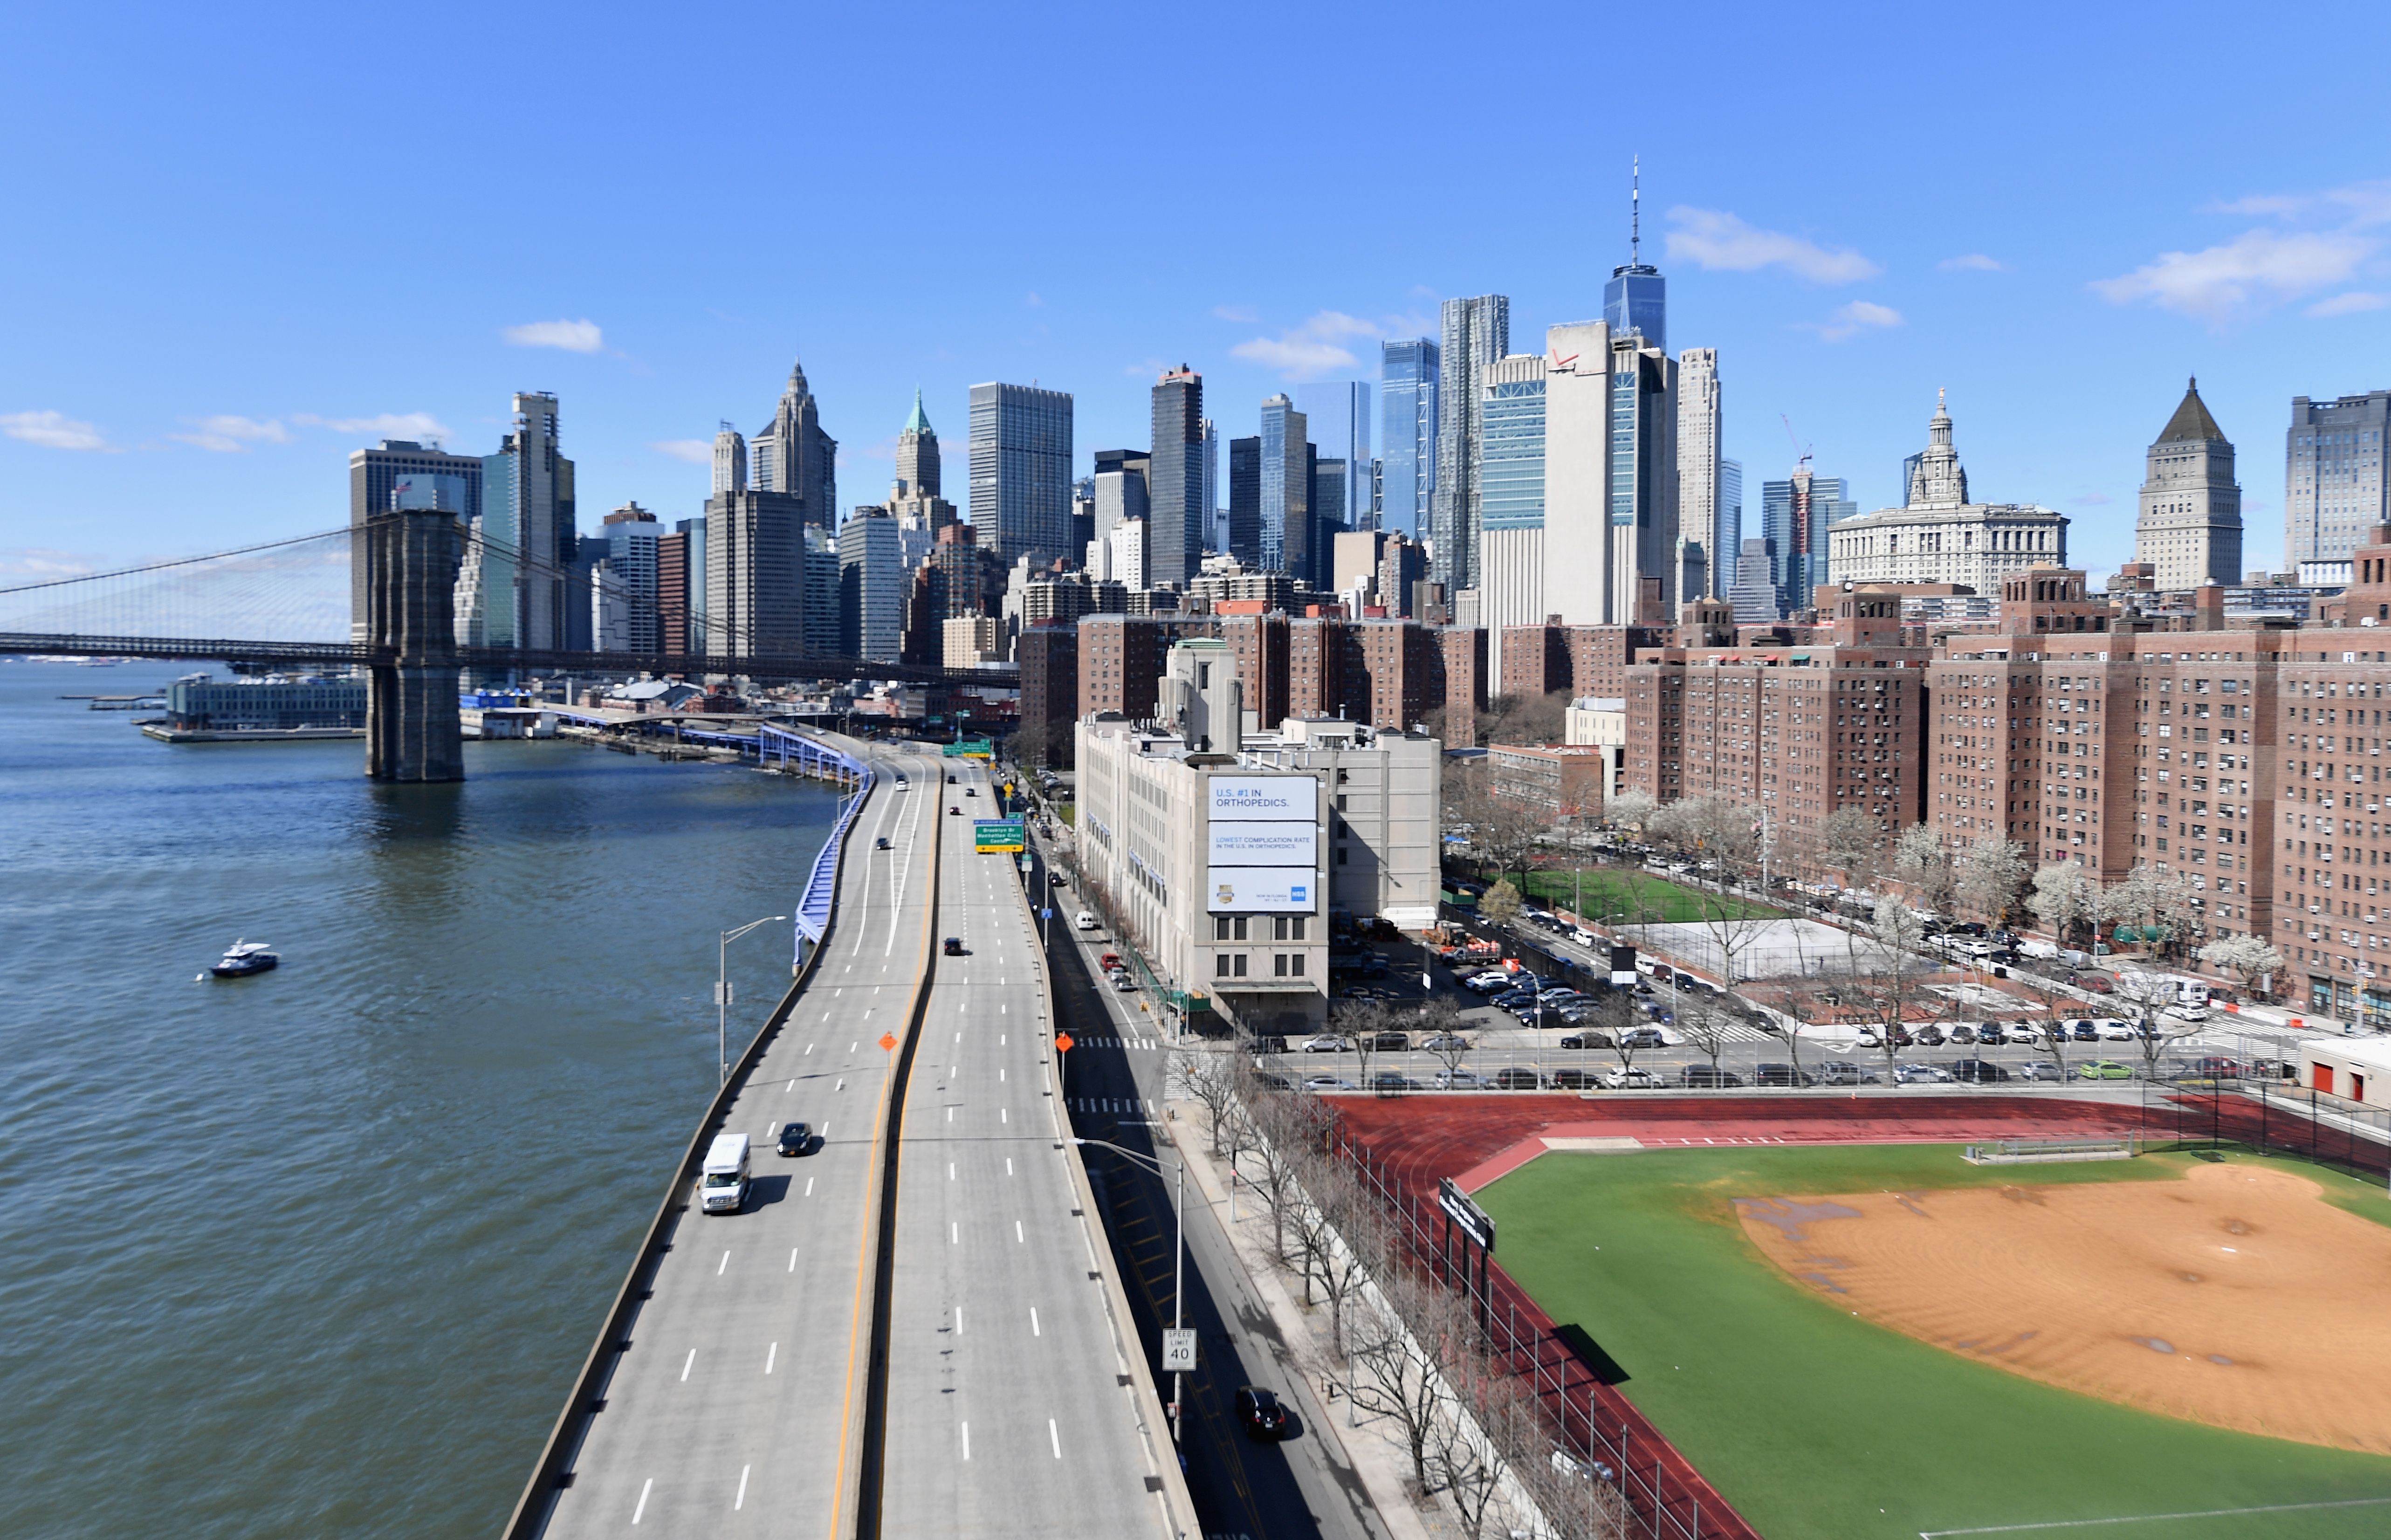 A view of morning traffic on FDR Drive is seen on March 24, 2020 in New York City.